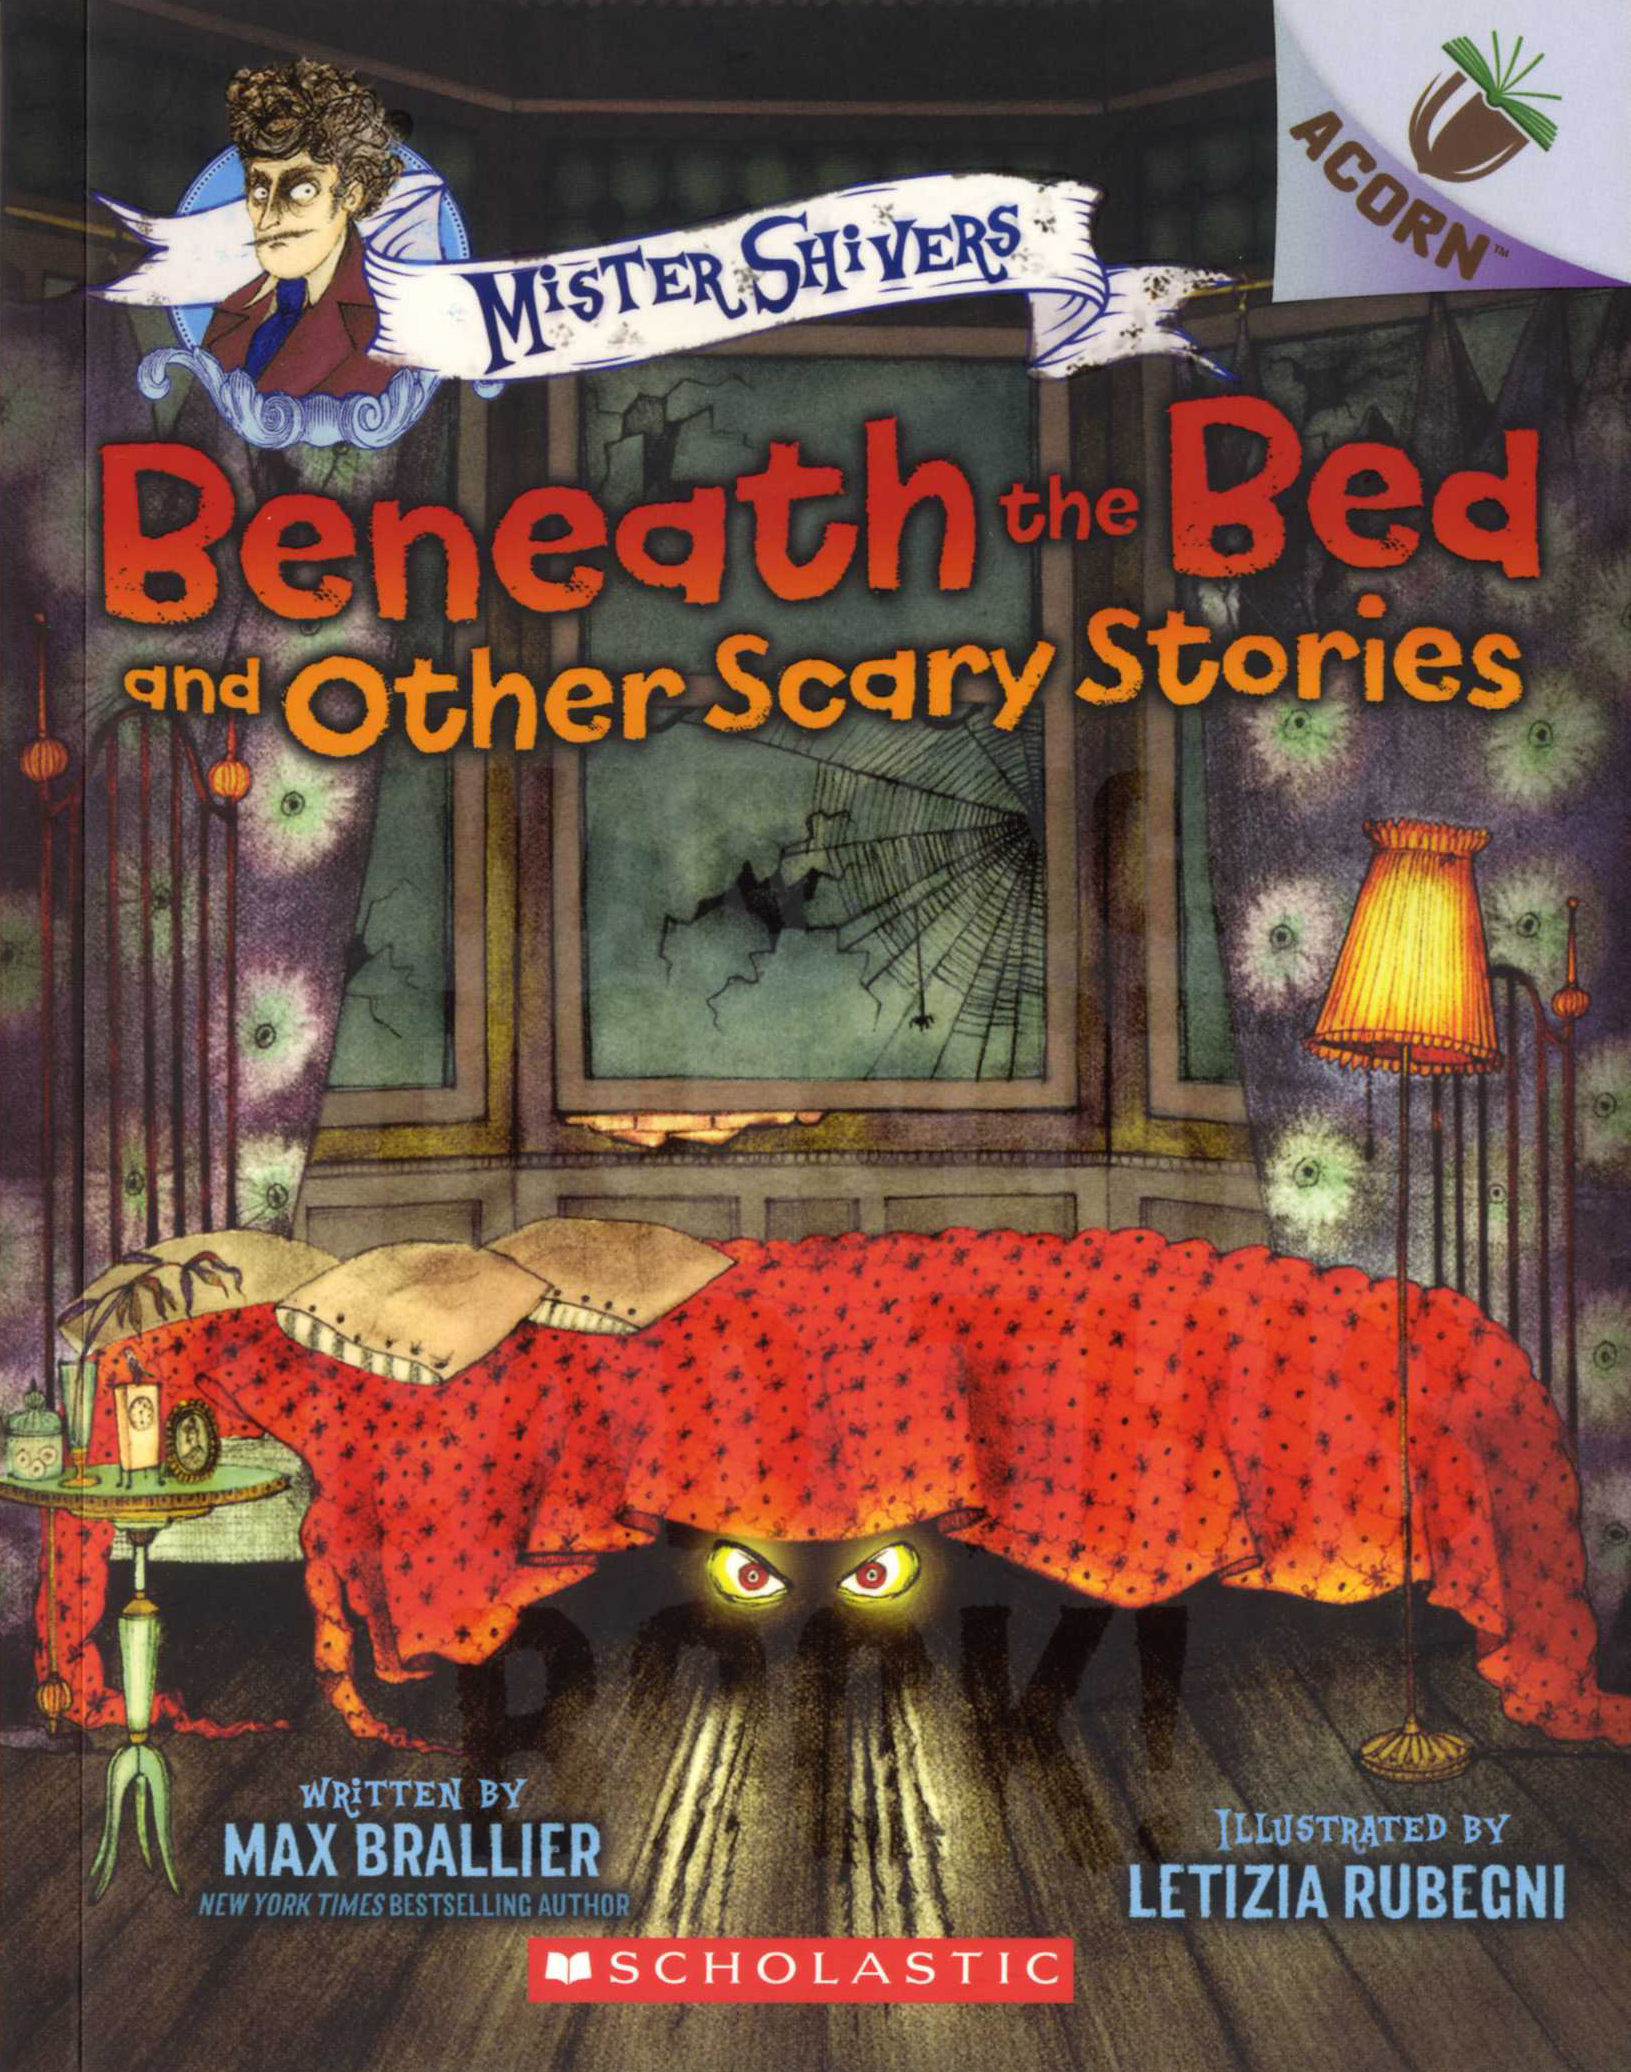 Mister Shivers #1: Beneath the Bed and Other Scary Stories